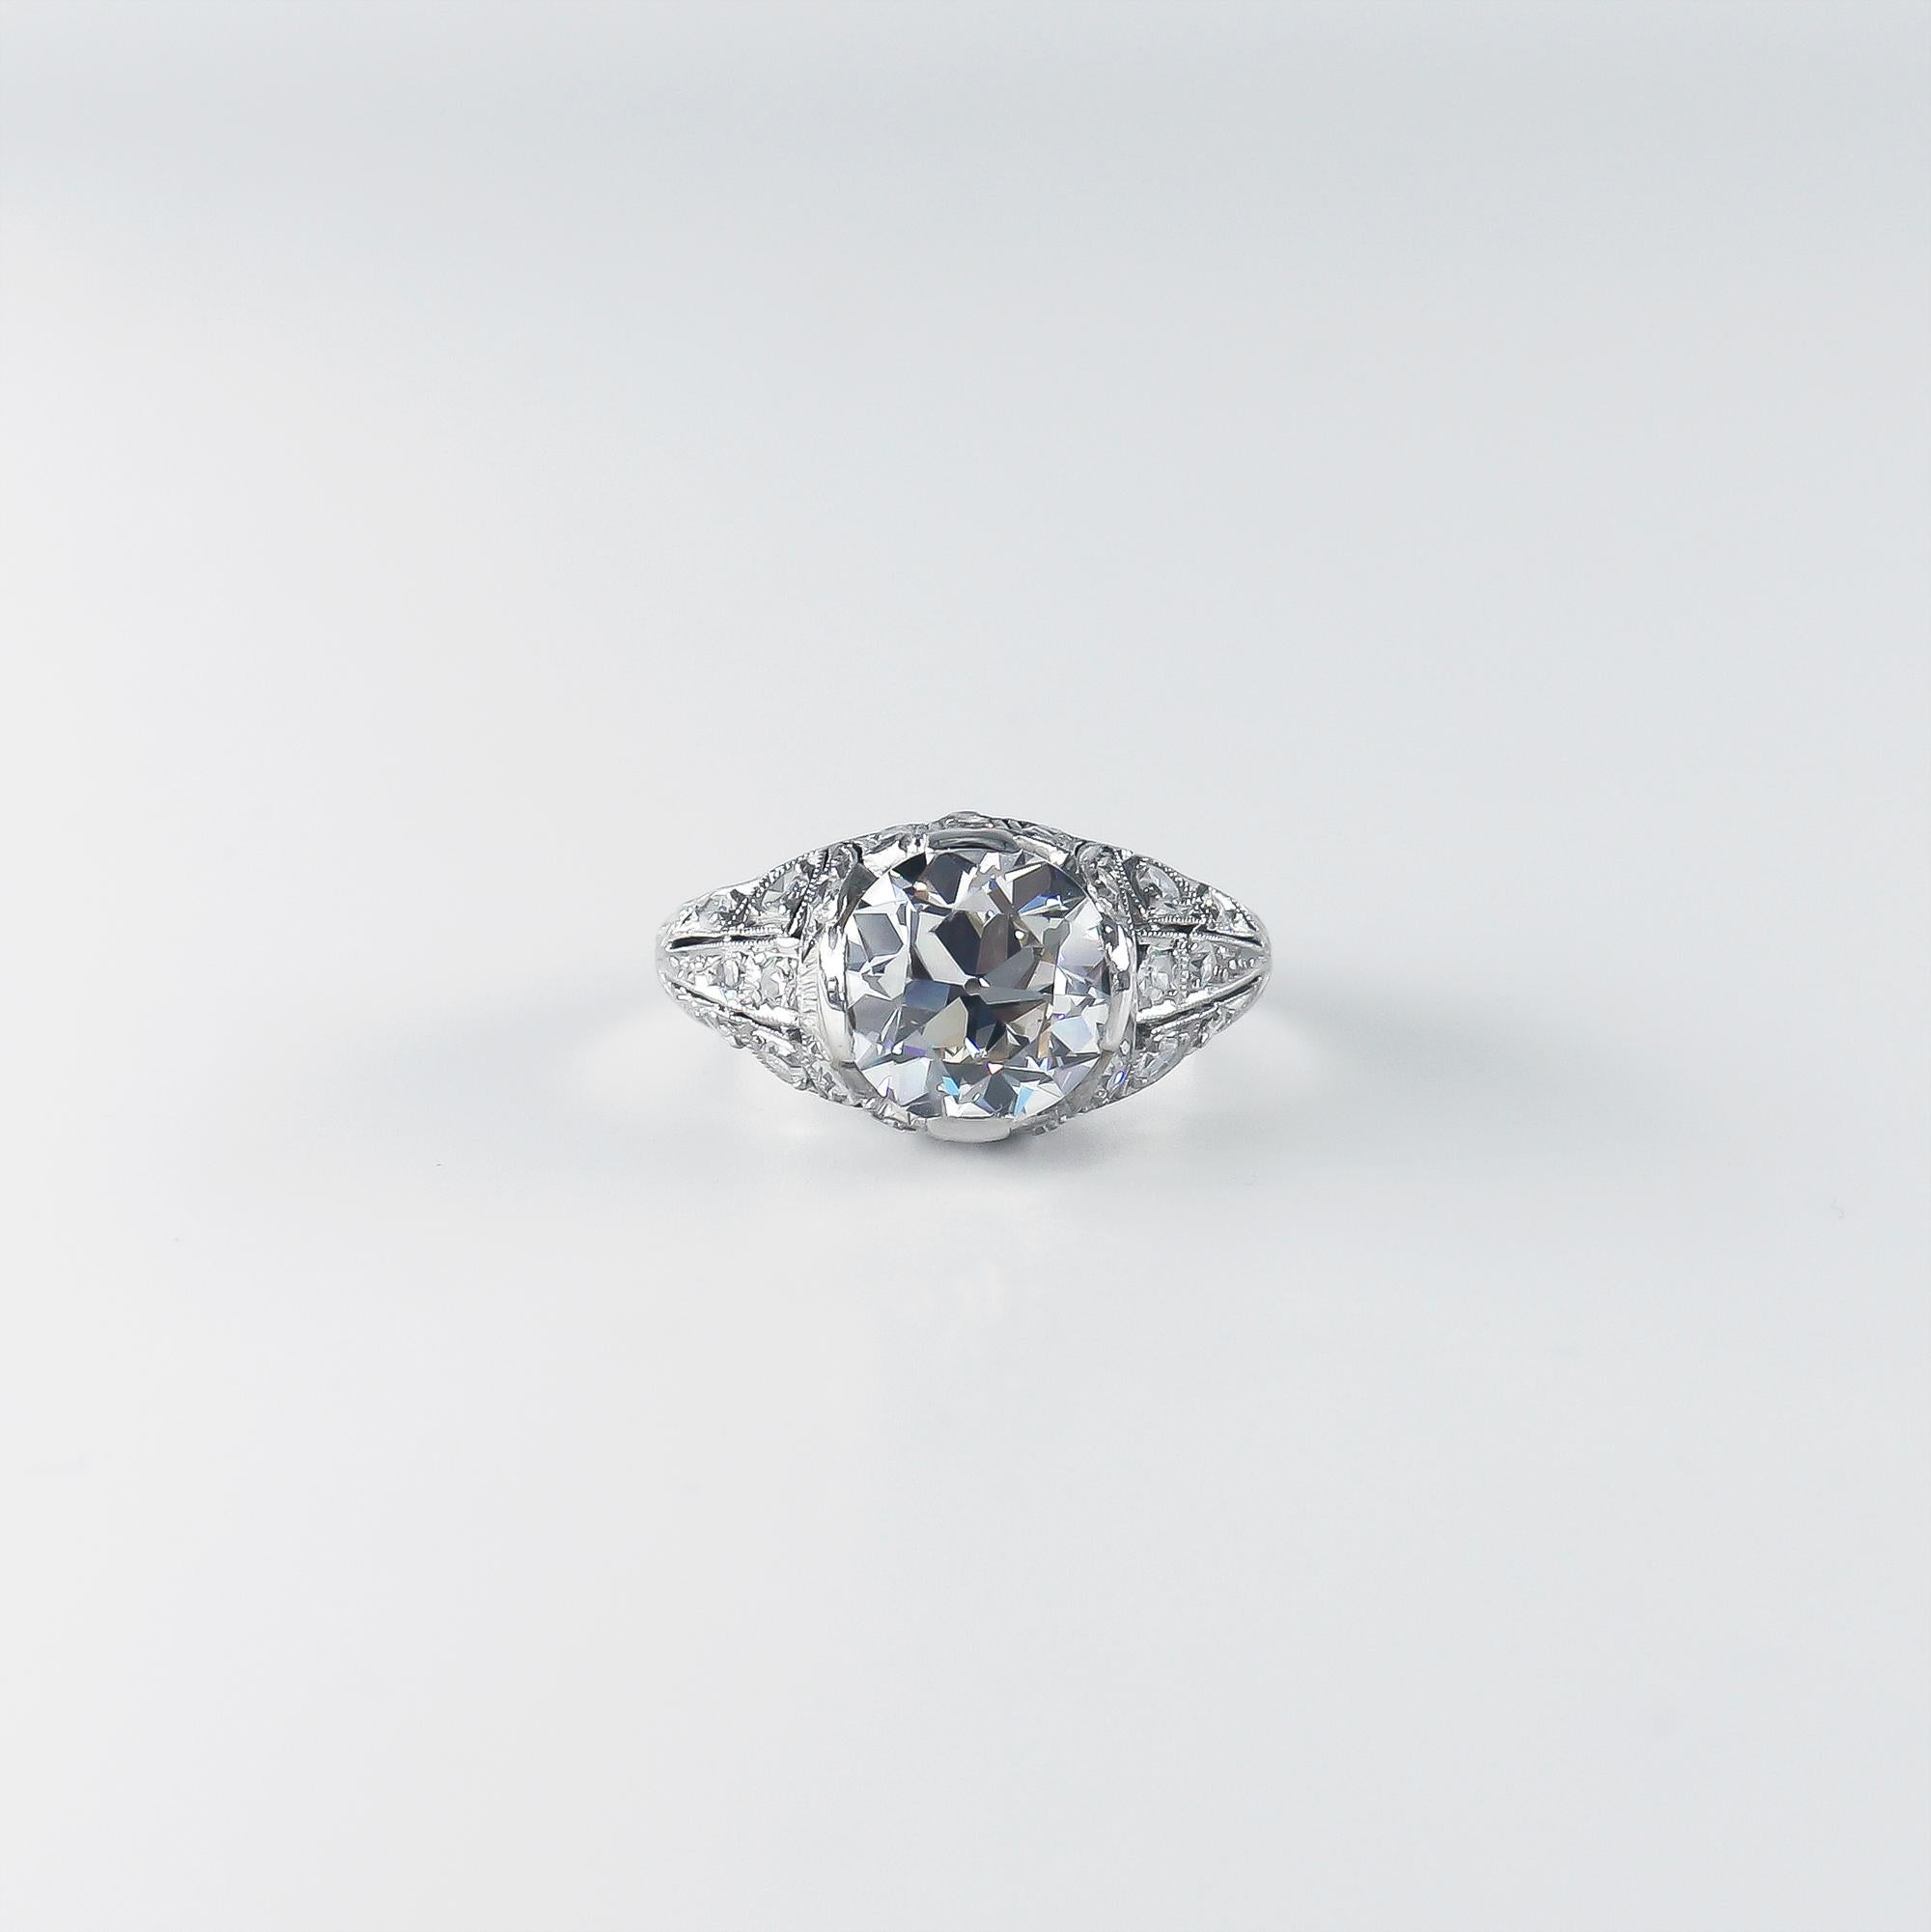 This breathtaking new acquisition by J. Birnbach features a GIA certified 2.93 carat Old European cut diamond of J color and VVS1 clarity as described by GIA grading report #6224242403. Set in a handmade, vintage, platinum ring with assorted